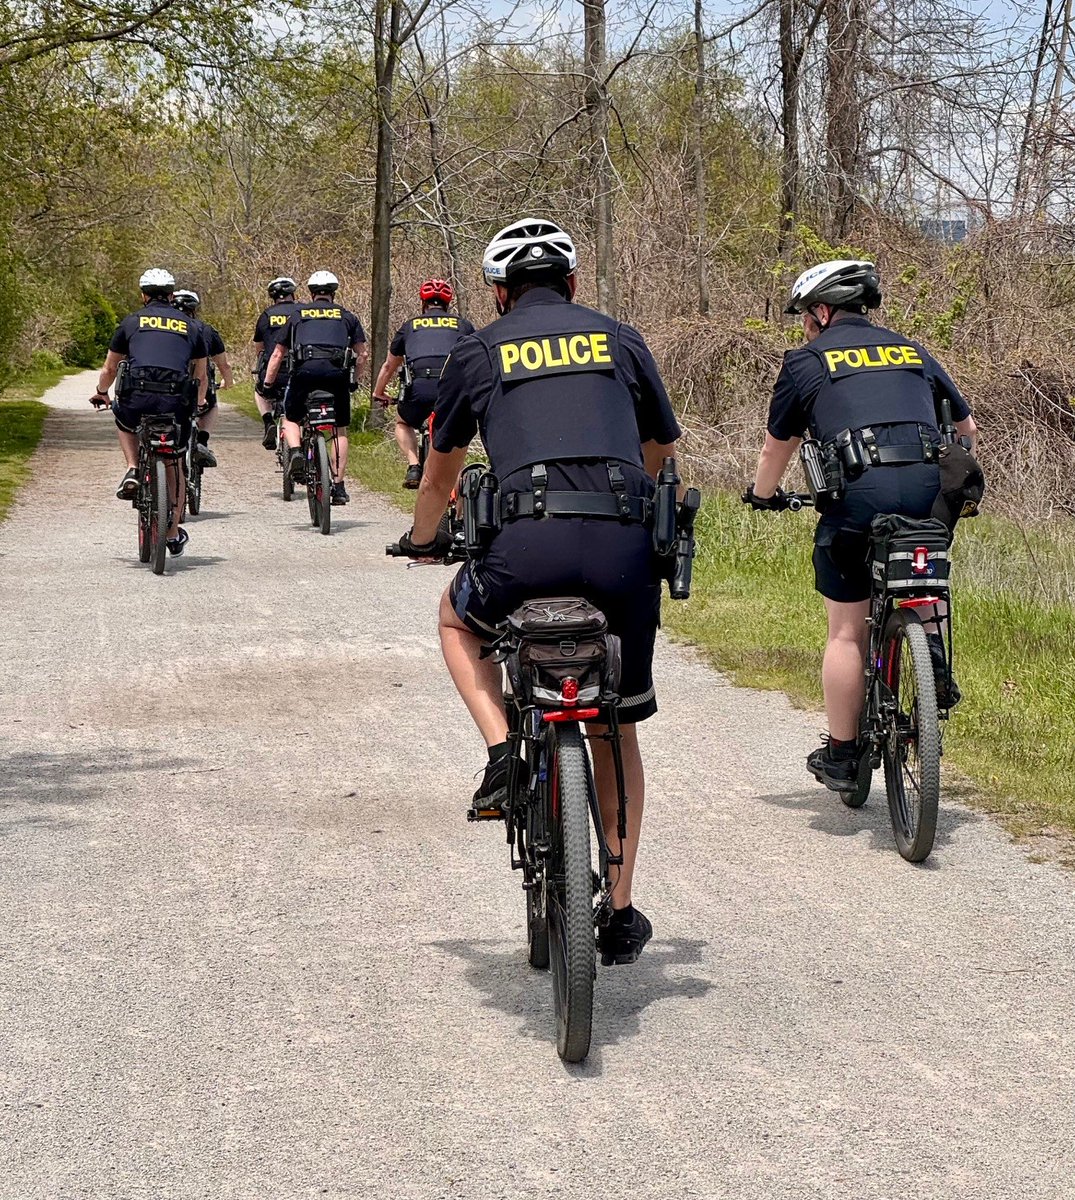 #BurlingtonOPP hosted a 3-day mountain bike training course with officers patrolling near Lake Ontario in Burlington and Hamilton. Members from Burlington, Niagara and Caledon participated and are now able to conduct bicycle patrols in their respective communities. ^rt